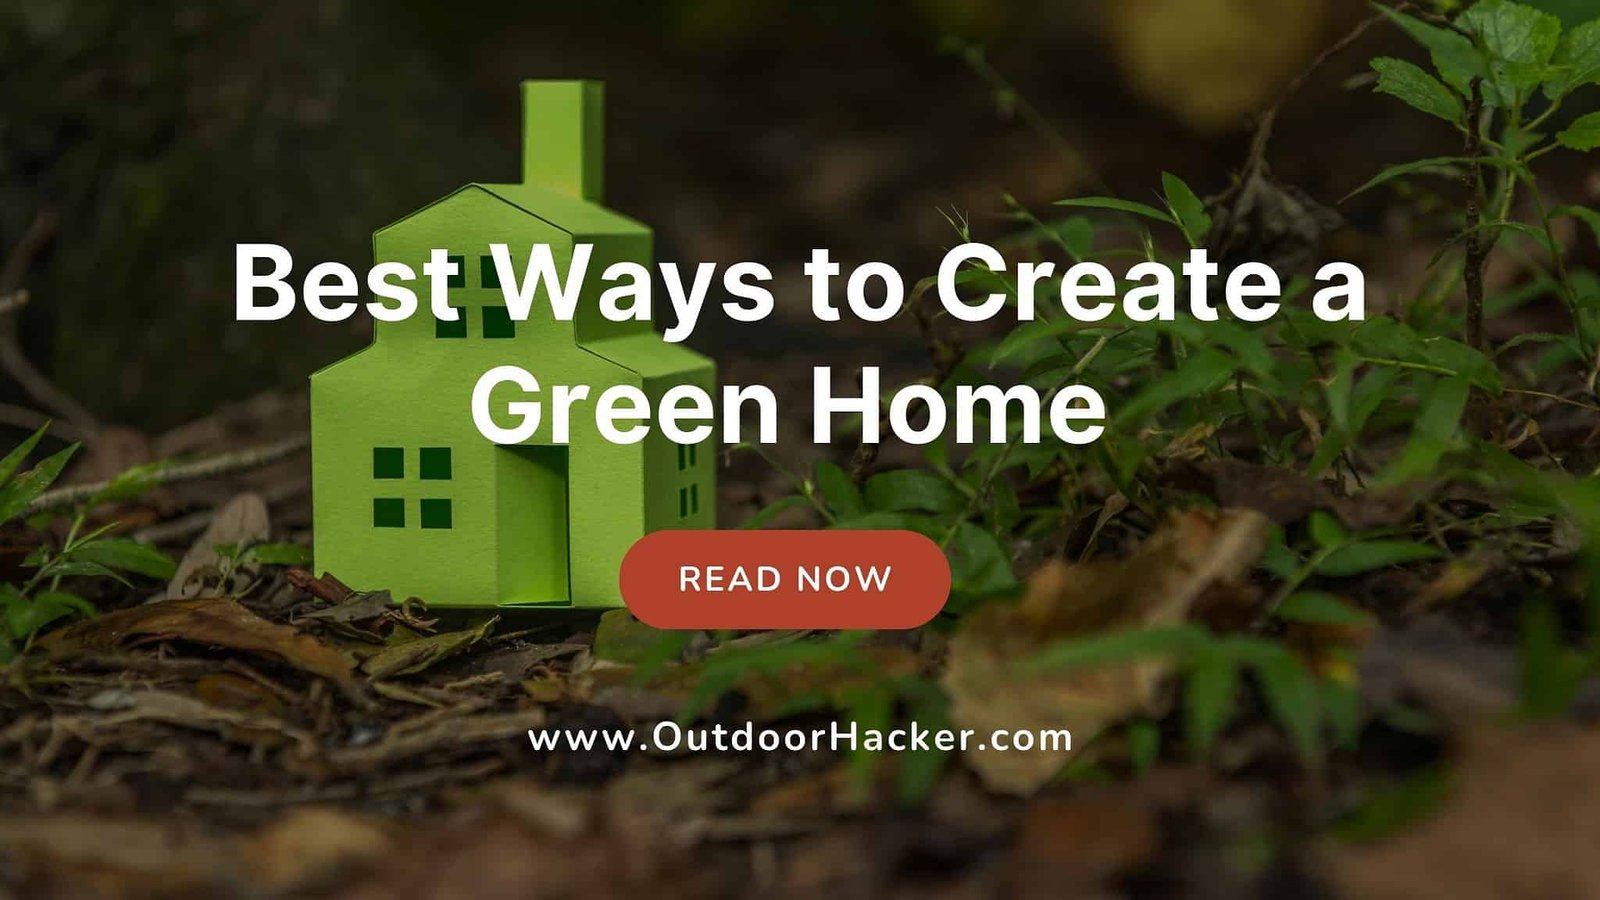 Best Ways to Create a Green Home Guide